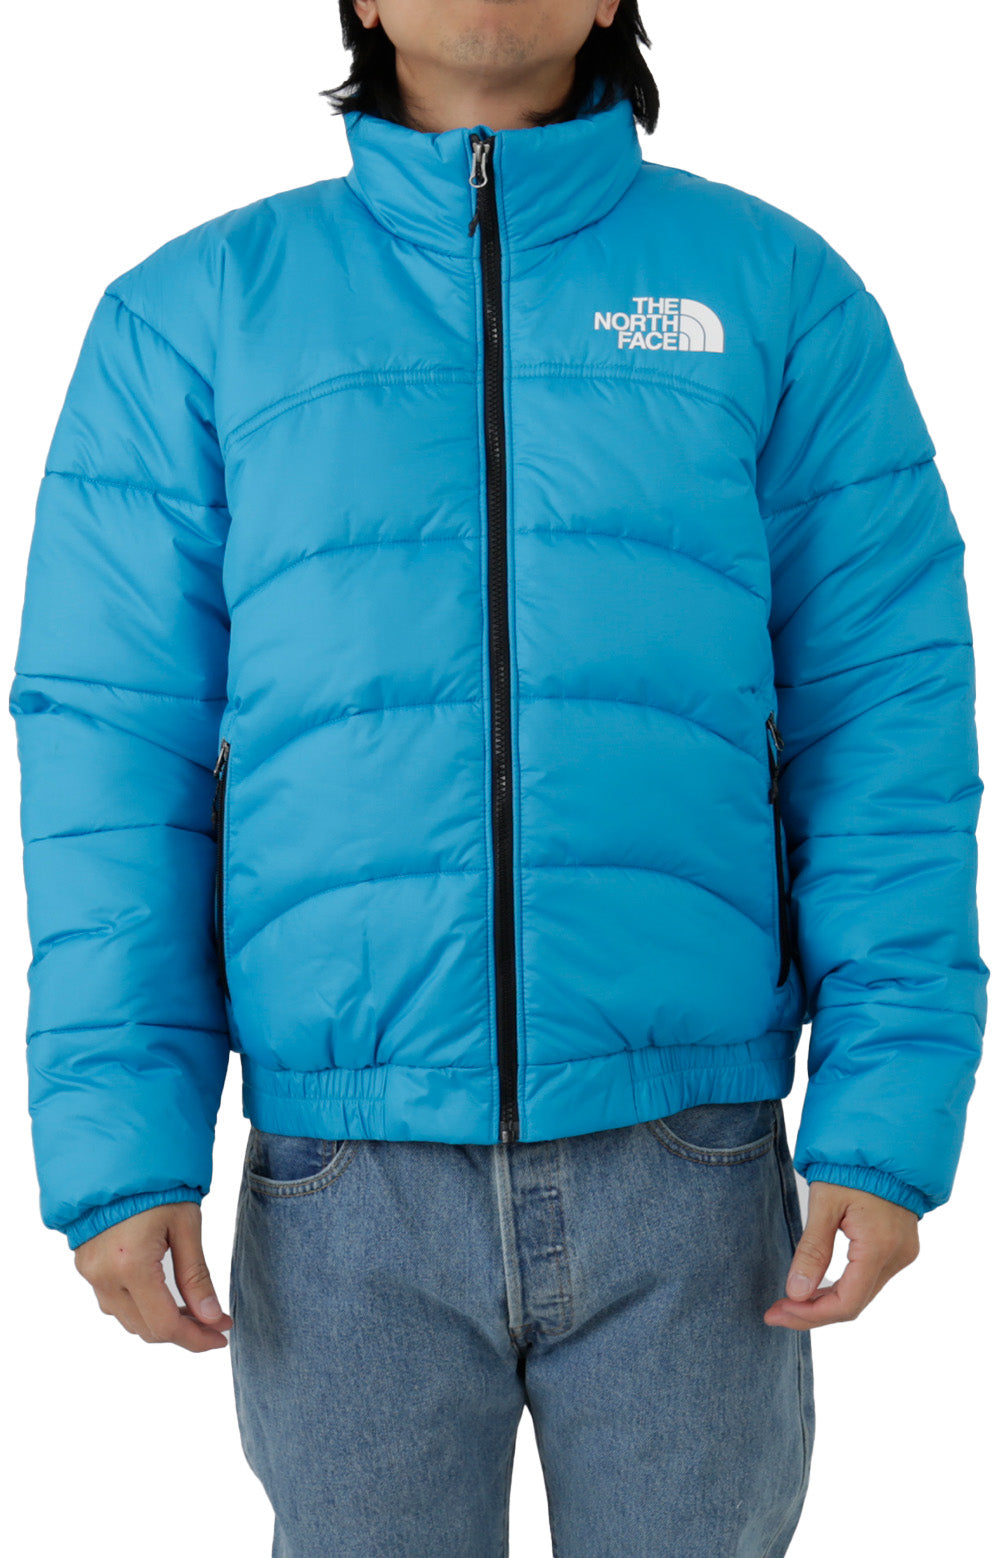 The North Face, TNF Jacket 2000 (NF0A7URE) - Acoustic Blue – MLTD